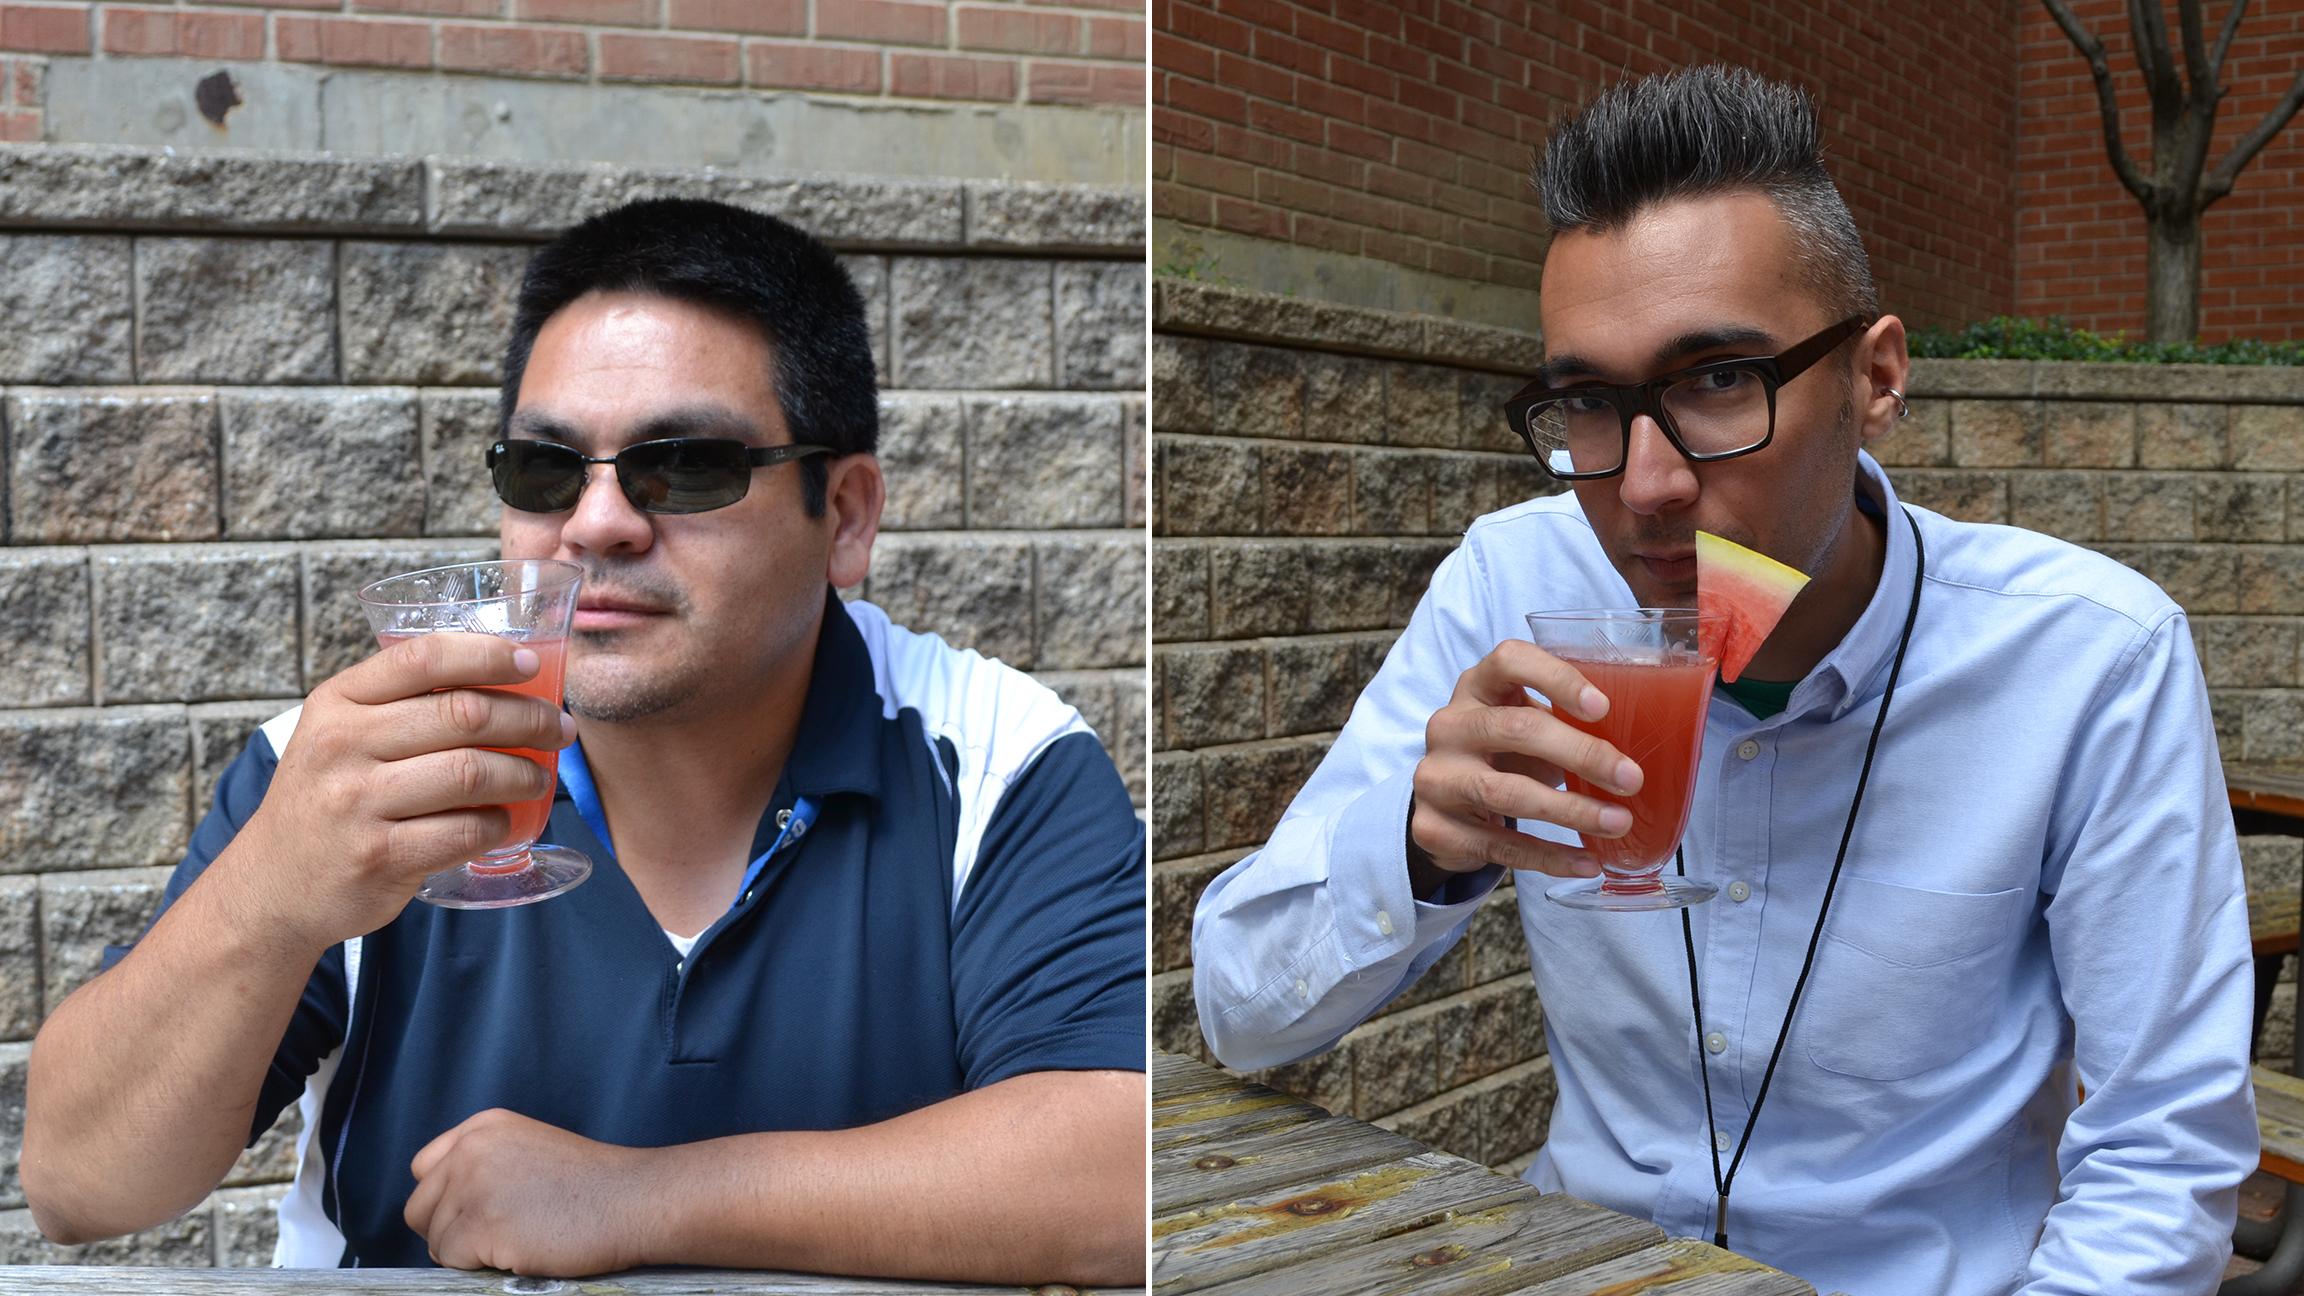 WTTW staffers Juan Carranza, left, and Hunter Clauss knock back a Booth One in the sun. (Erica Gunderson / Chicago Tonight)